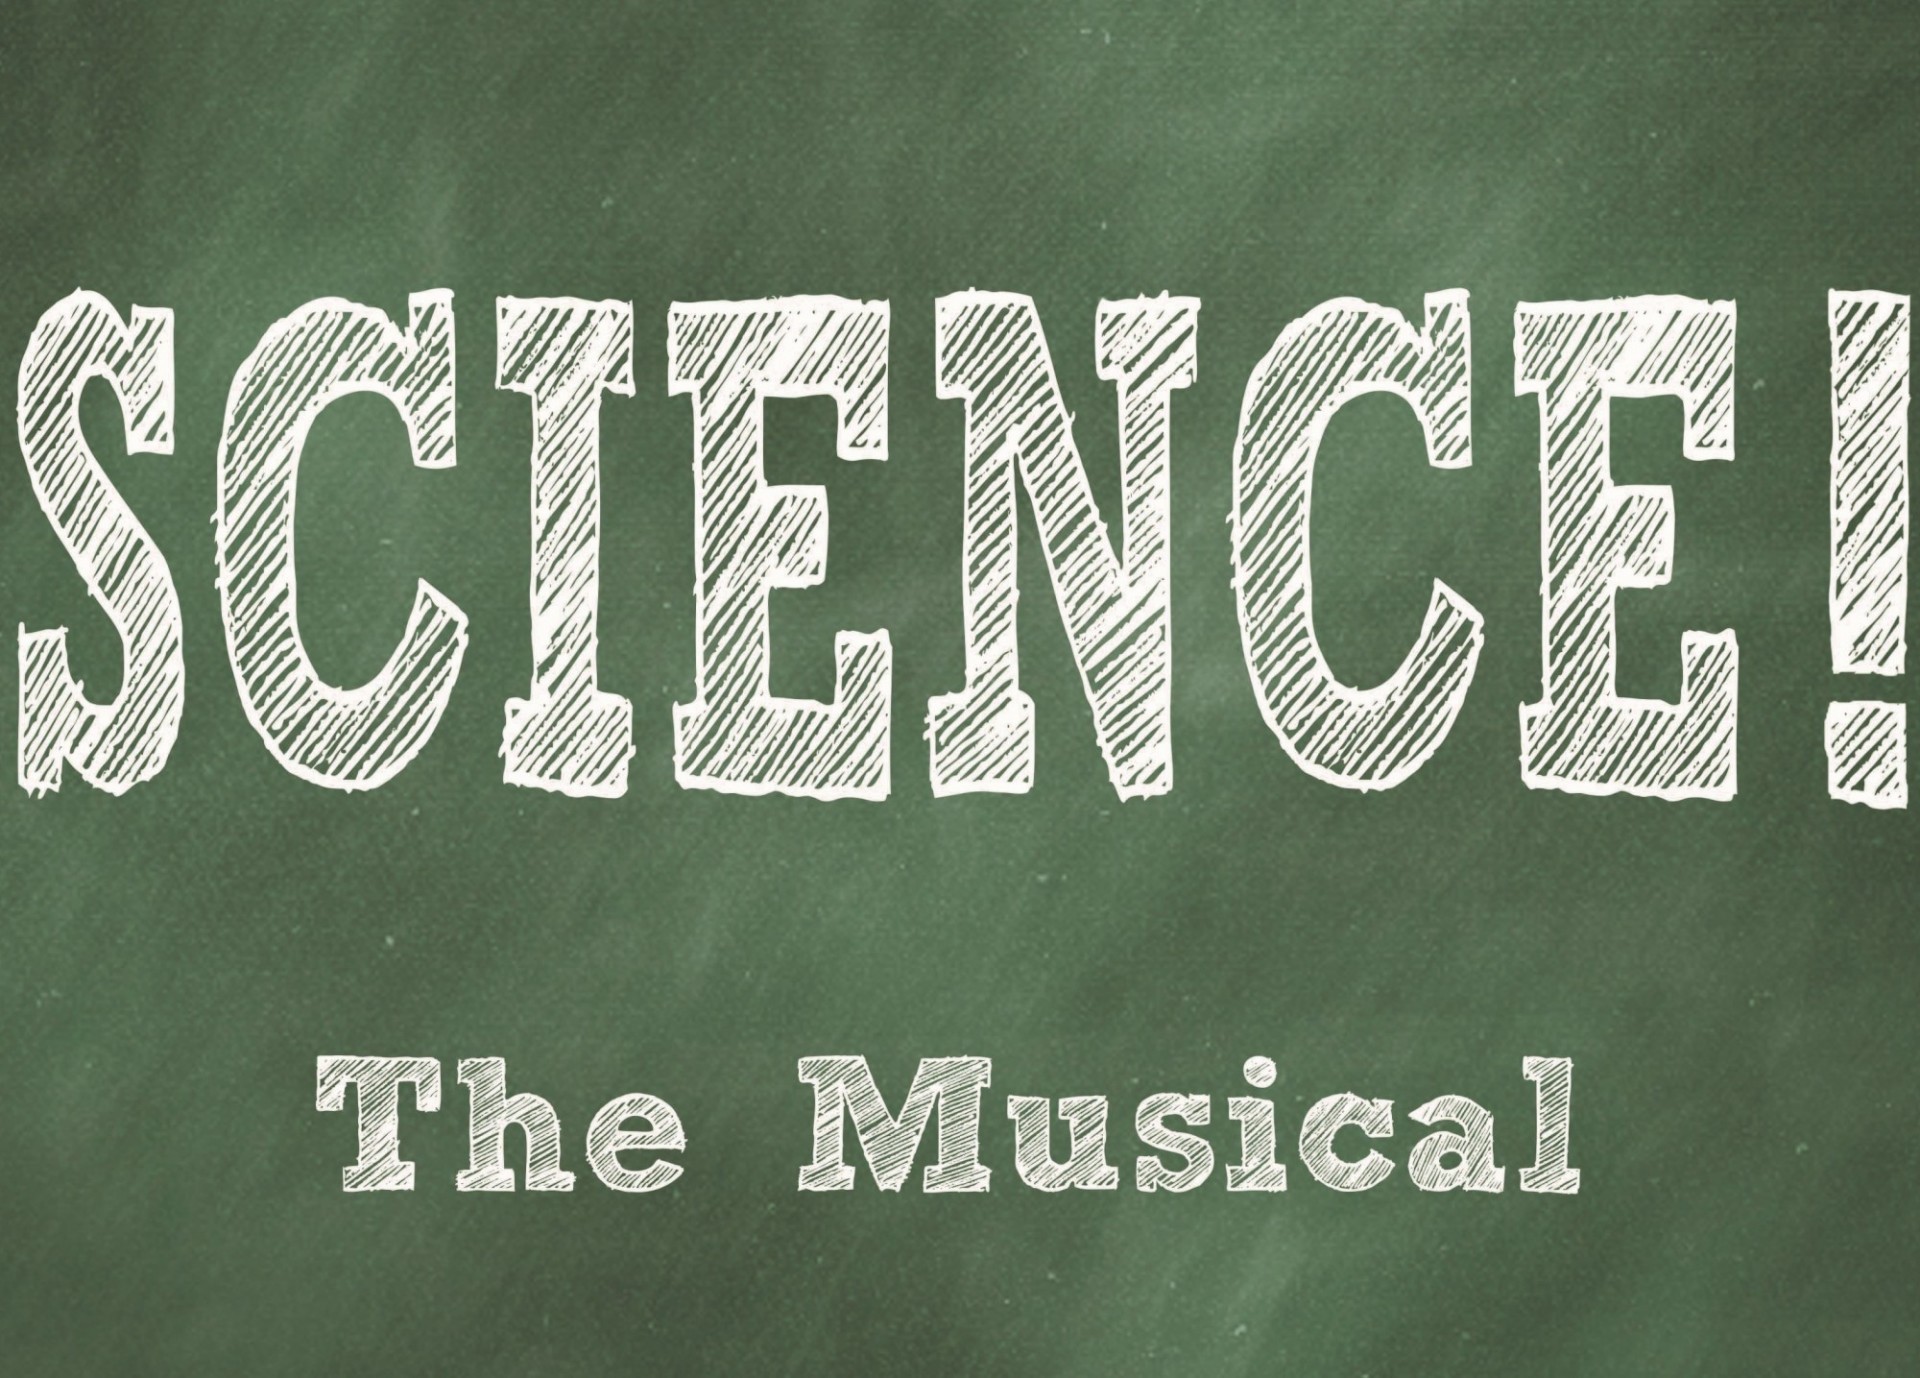 "Science! The Musical" poster on green background